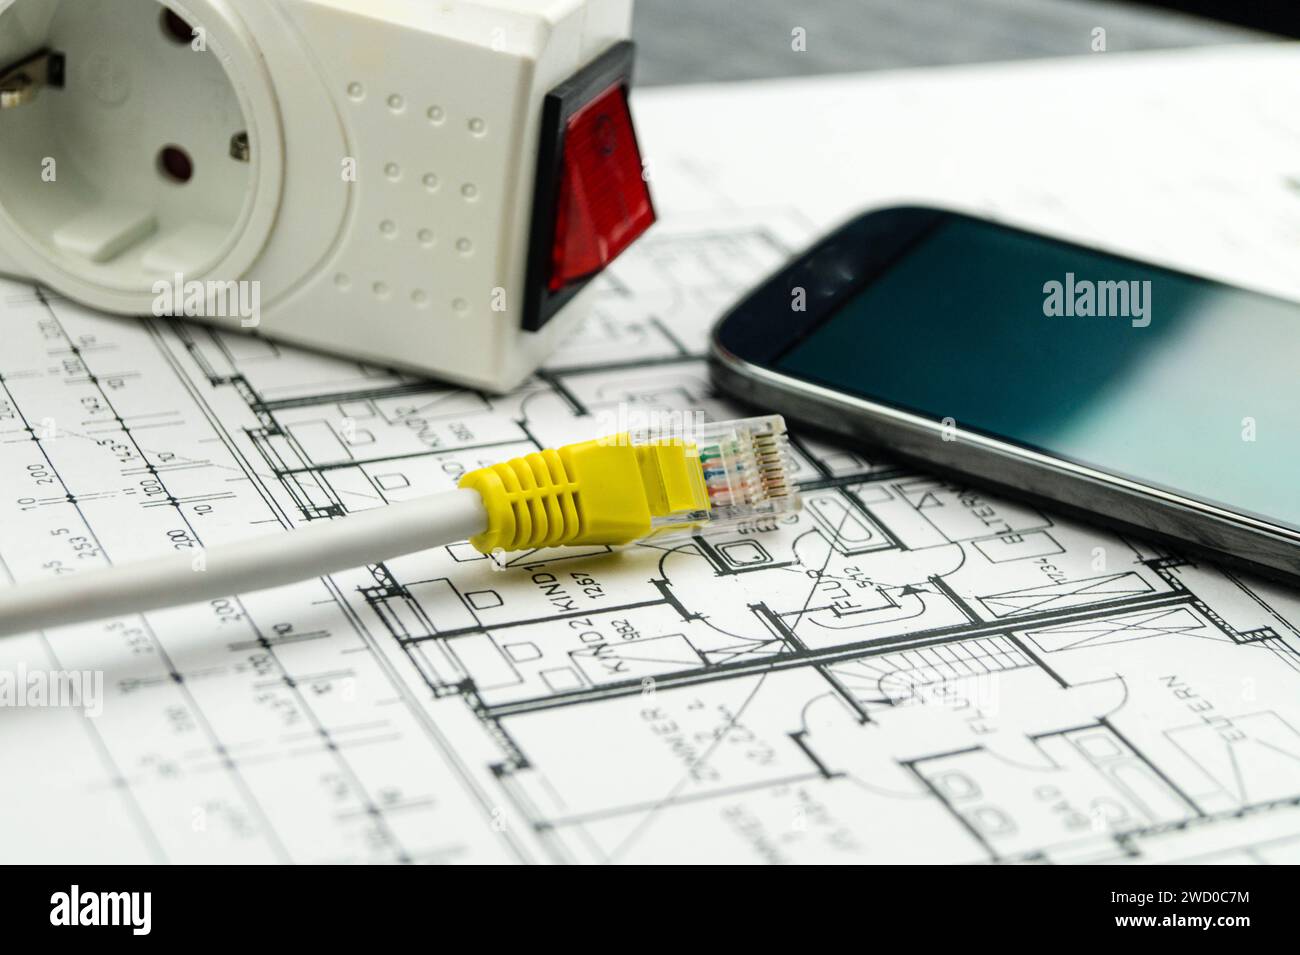 socket outlet adapter with switch, smartphone and network plug on construction drawing, symbolic image for Smart Home Stock Photo